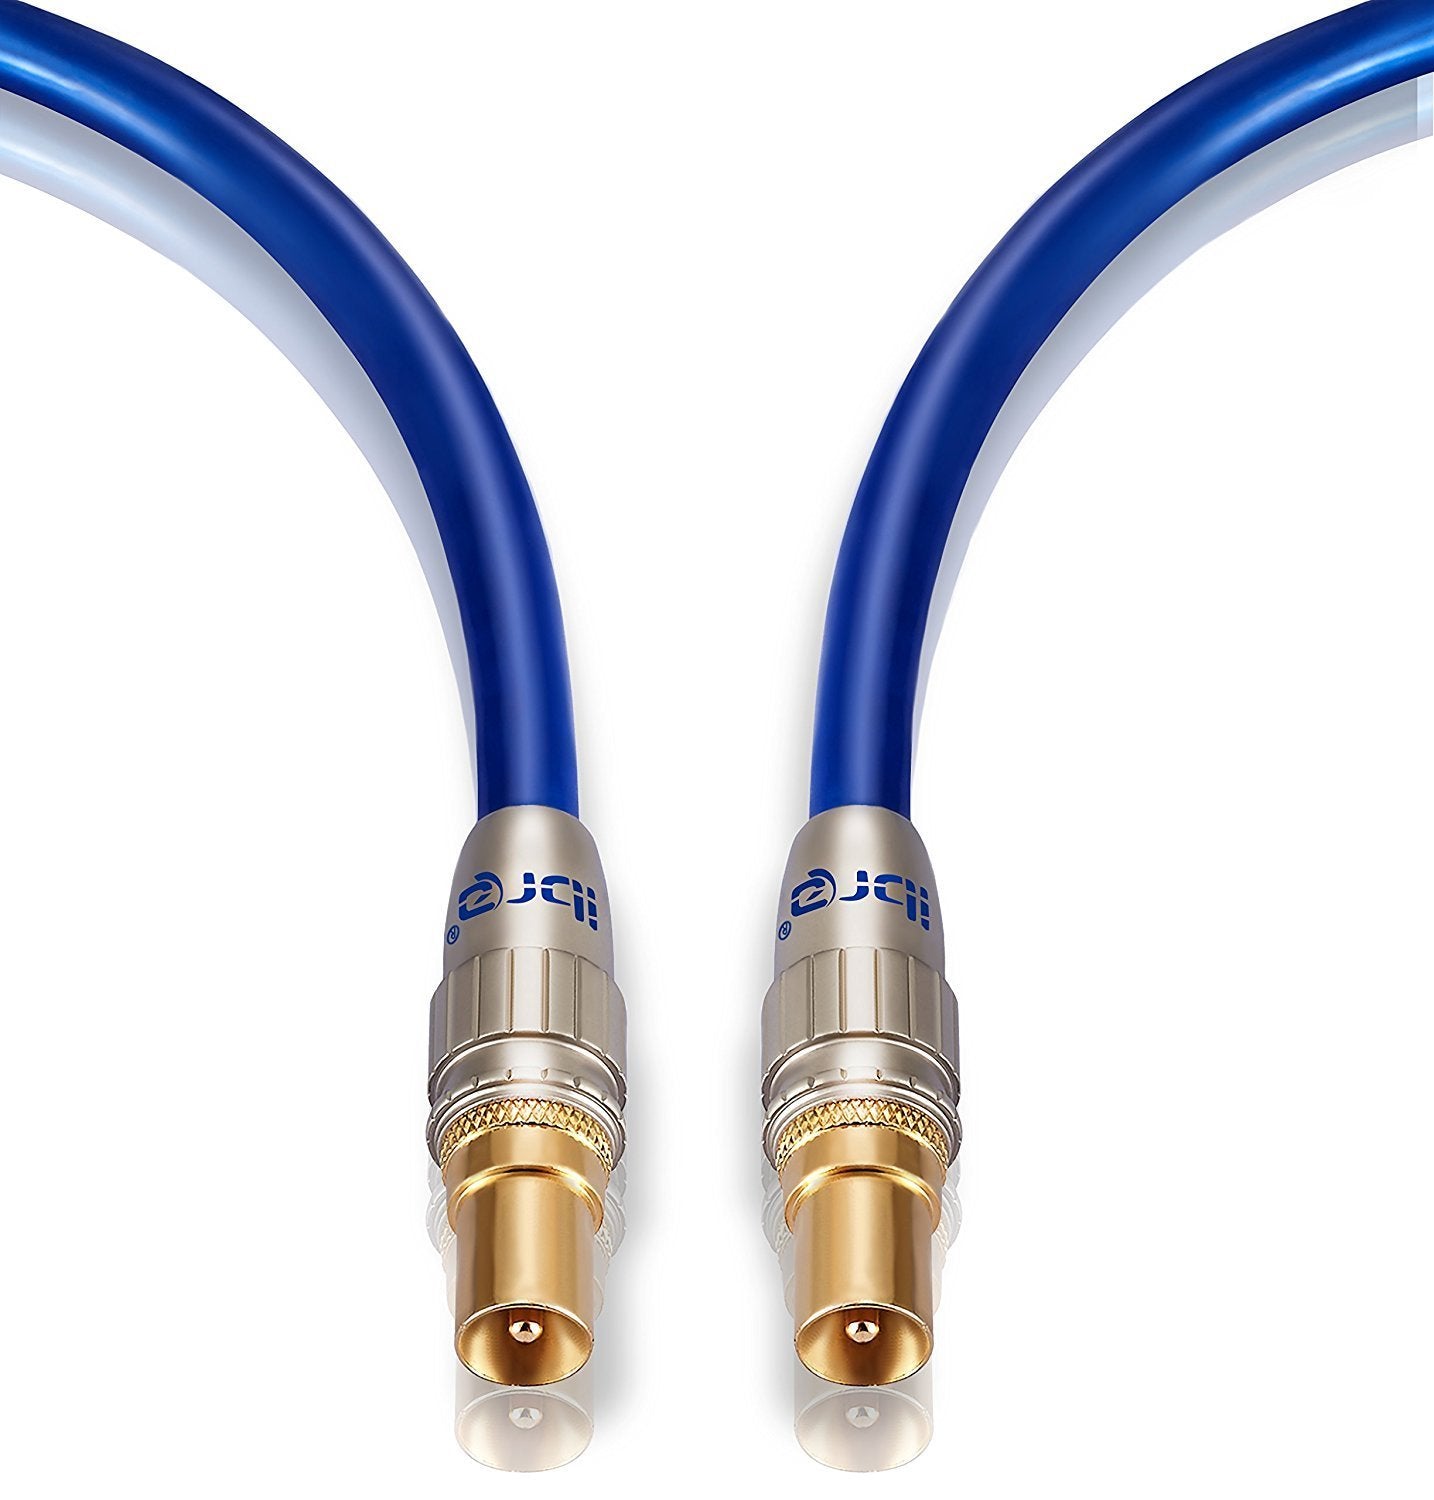 1M HDTV Antenna Cable | TV Aerial Cable | Premium Freeview Coaxial Cable | Connectors: Coax Male to Coax Male | For UHF / RF TVs, VCRs, DVD players, DVRs, cable boxes and satellite | IBRA Blue Gold